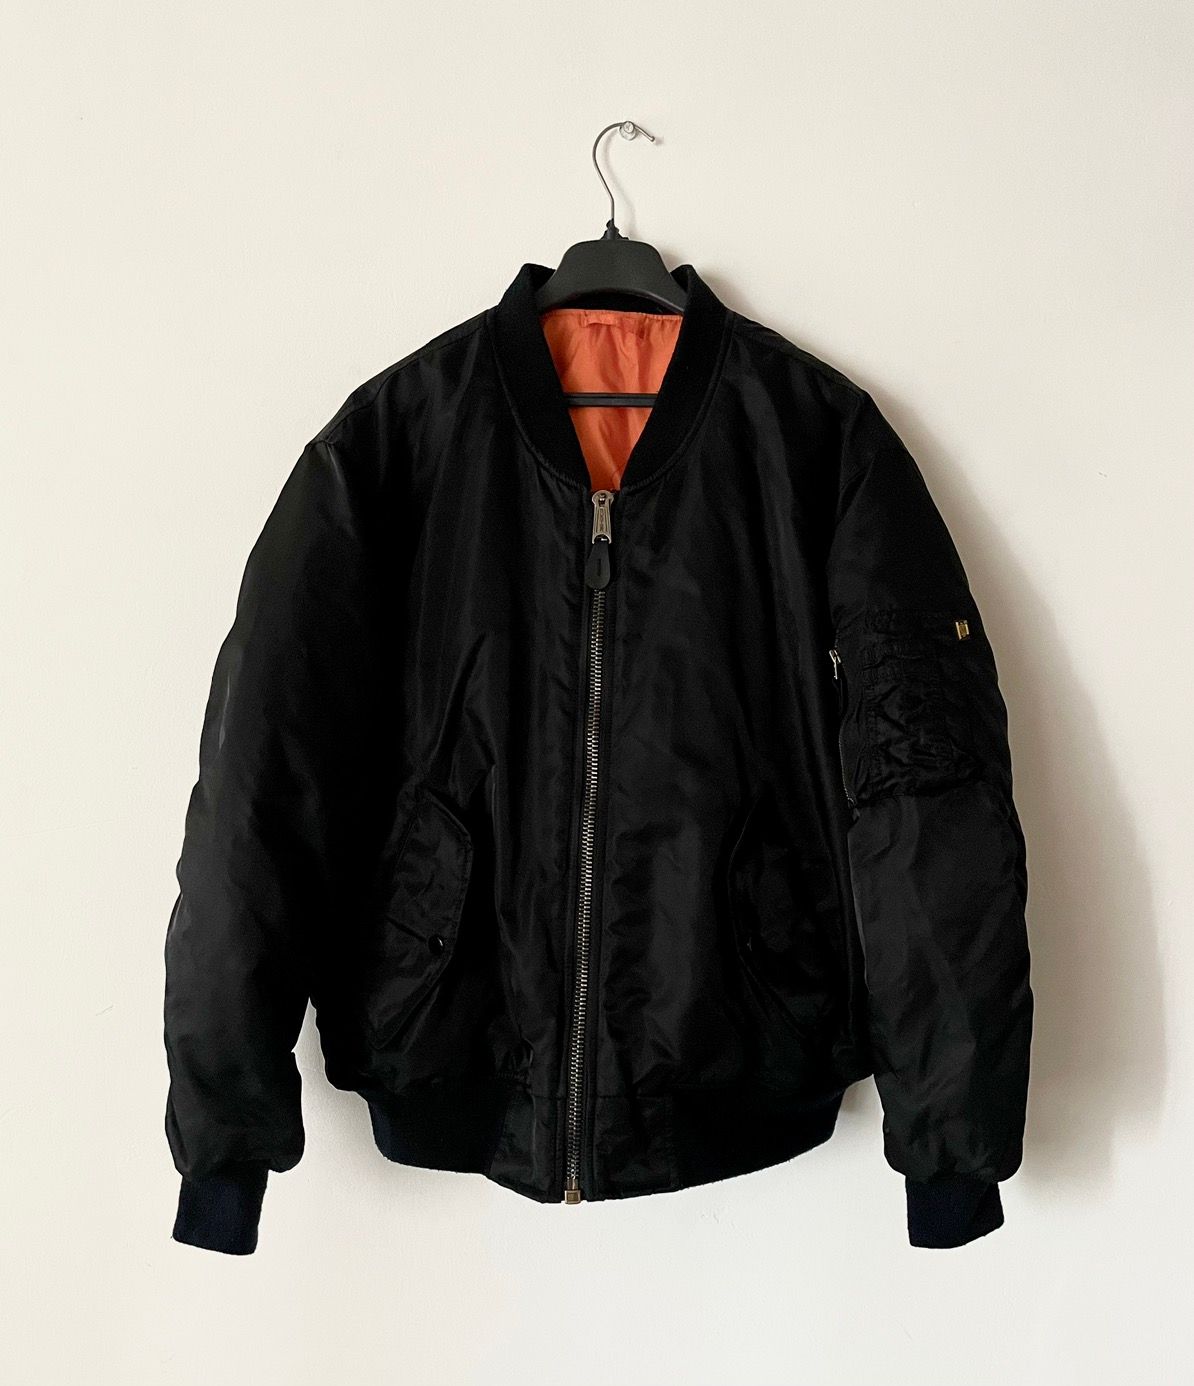 Ma 1 Vintage Buster Ma-1 Military Bomber Jacket | Grailed